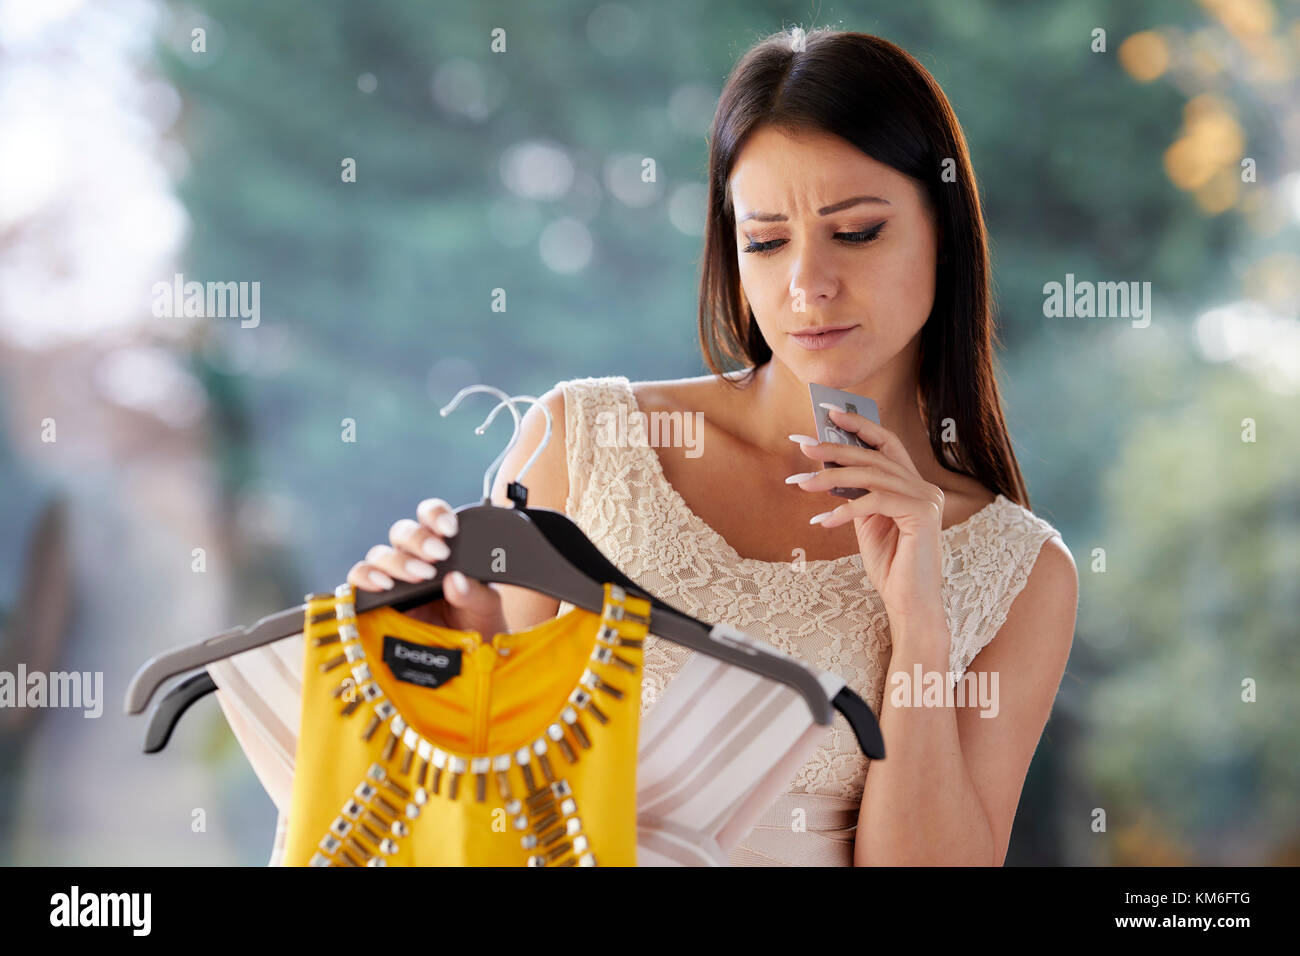 Girl looking doubtful purchasing clothes Stock Photo